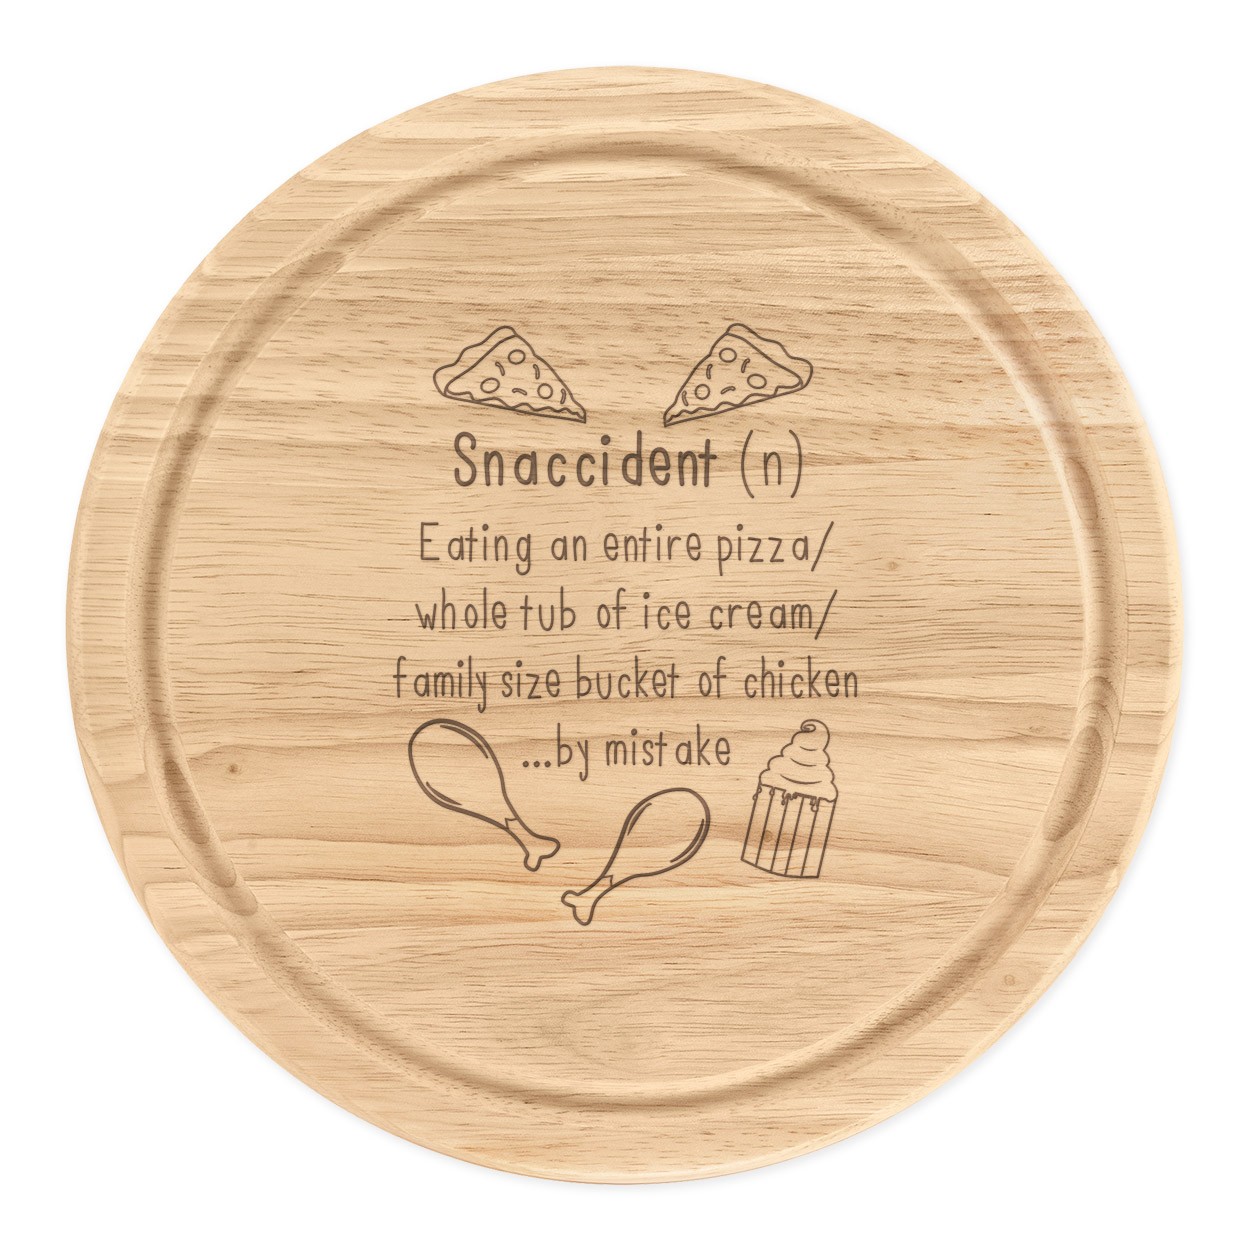 Snaccident Definition Wooden Chopping Cheese Board Round 25cm